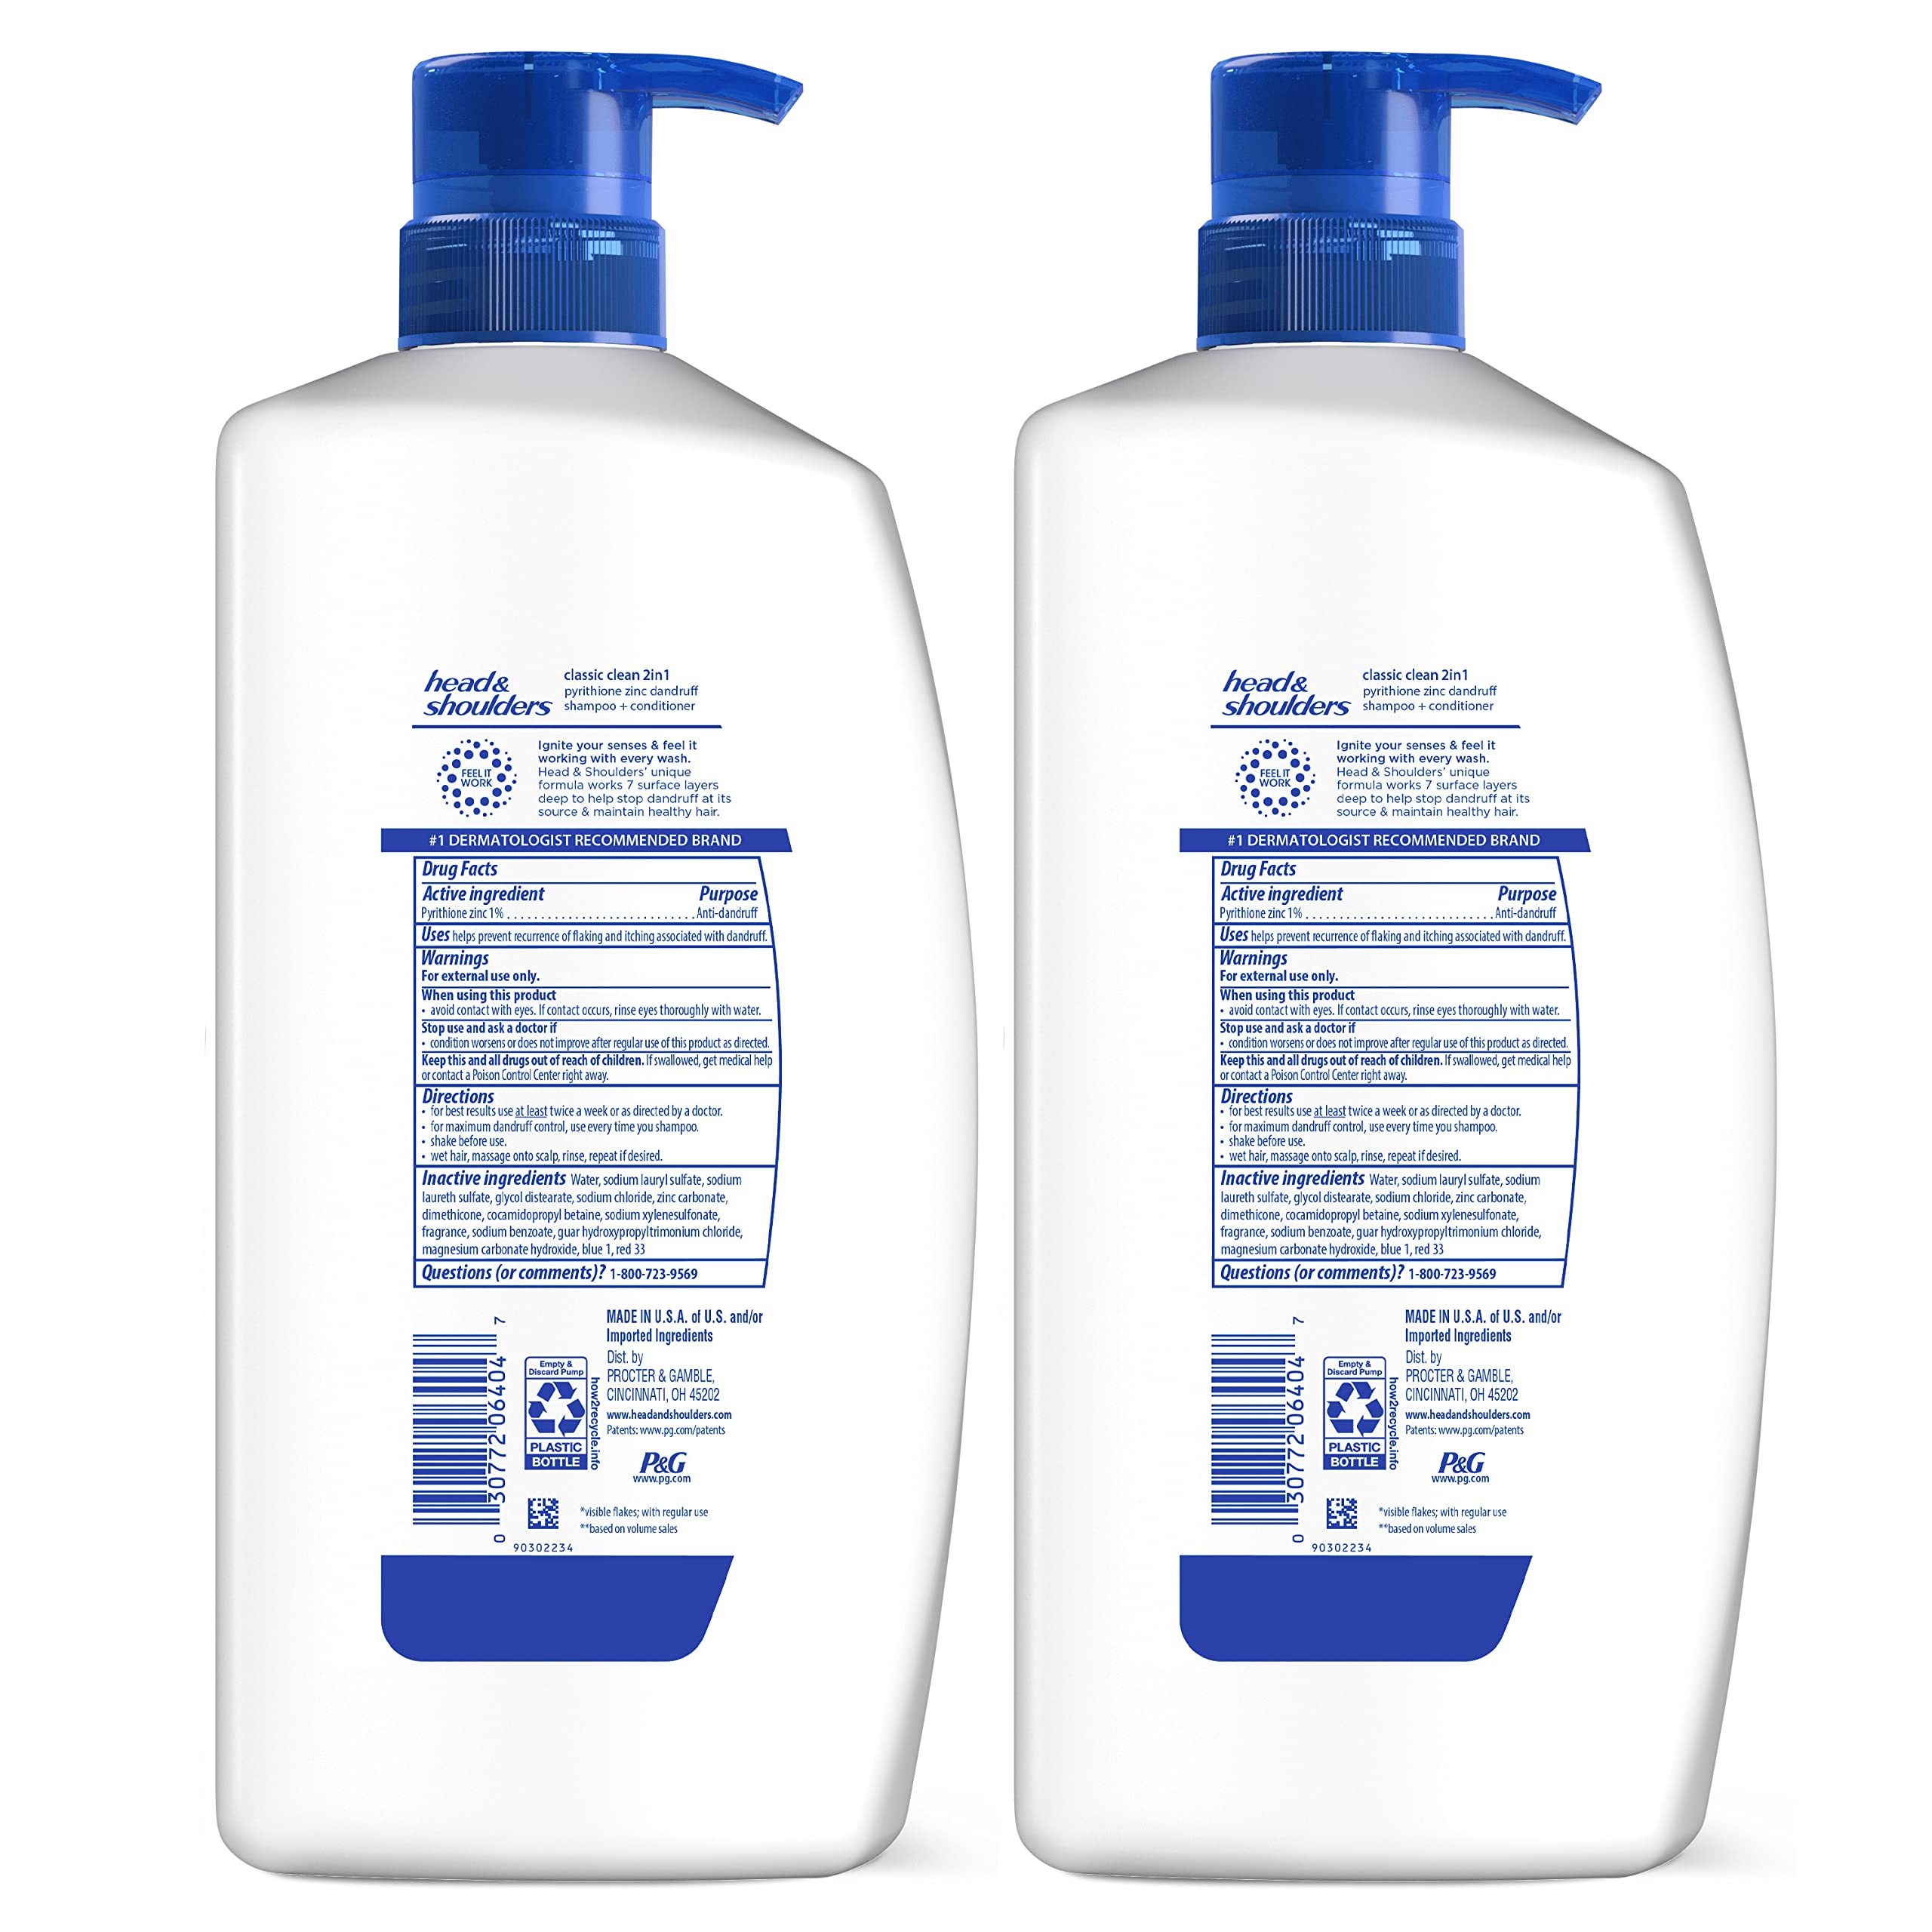 Head and Shoulders Shampoo and Conditioner 2 in 1, Anti Dandruff Treatment & Scalp Care, Classic Clean Scent, for All Hair Types including Color Treated, Curly or Textured Hair, 32.1 fl oz, Twin Pack